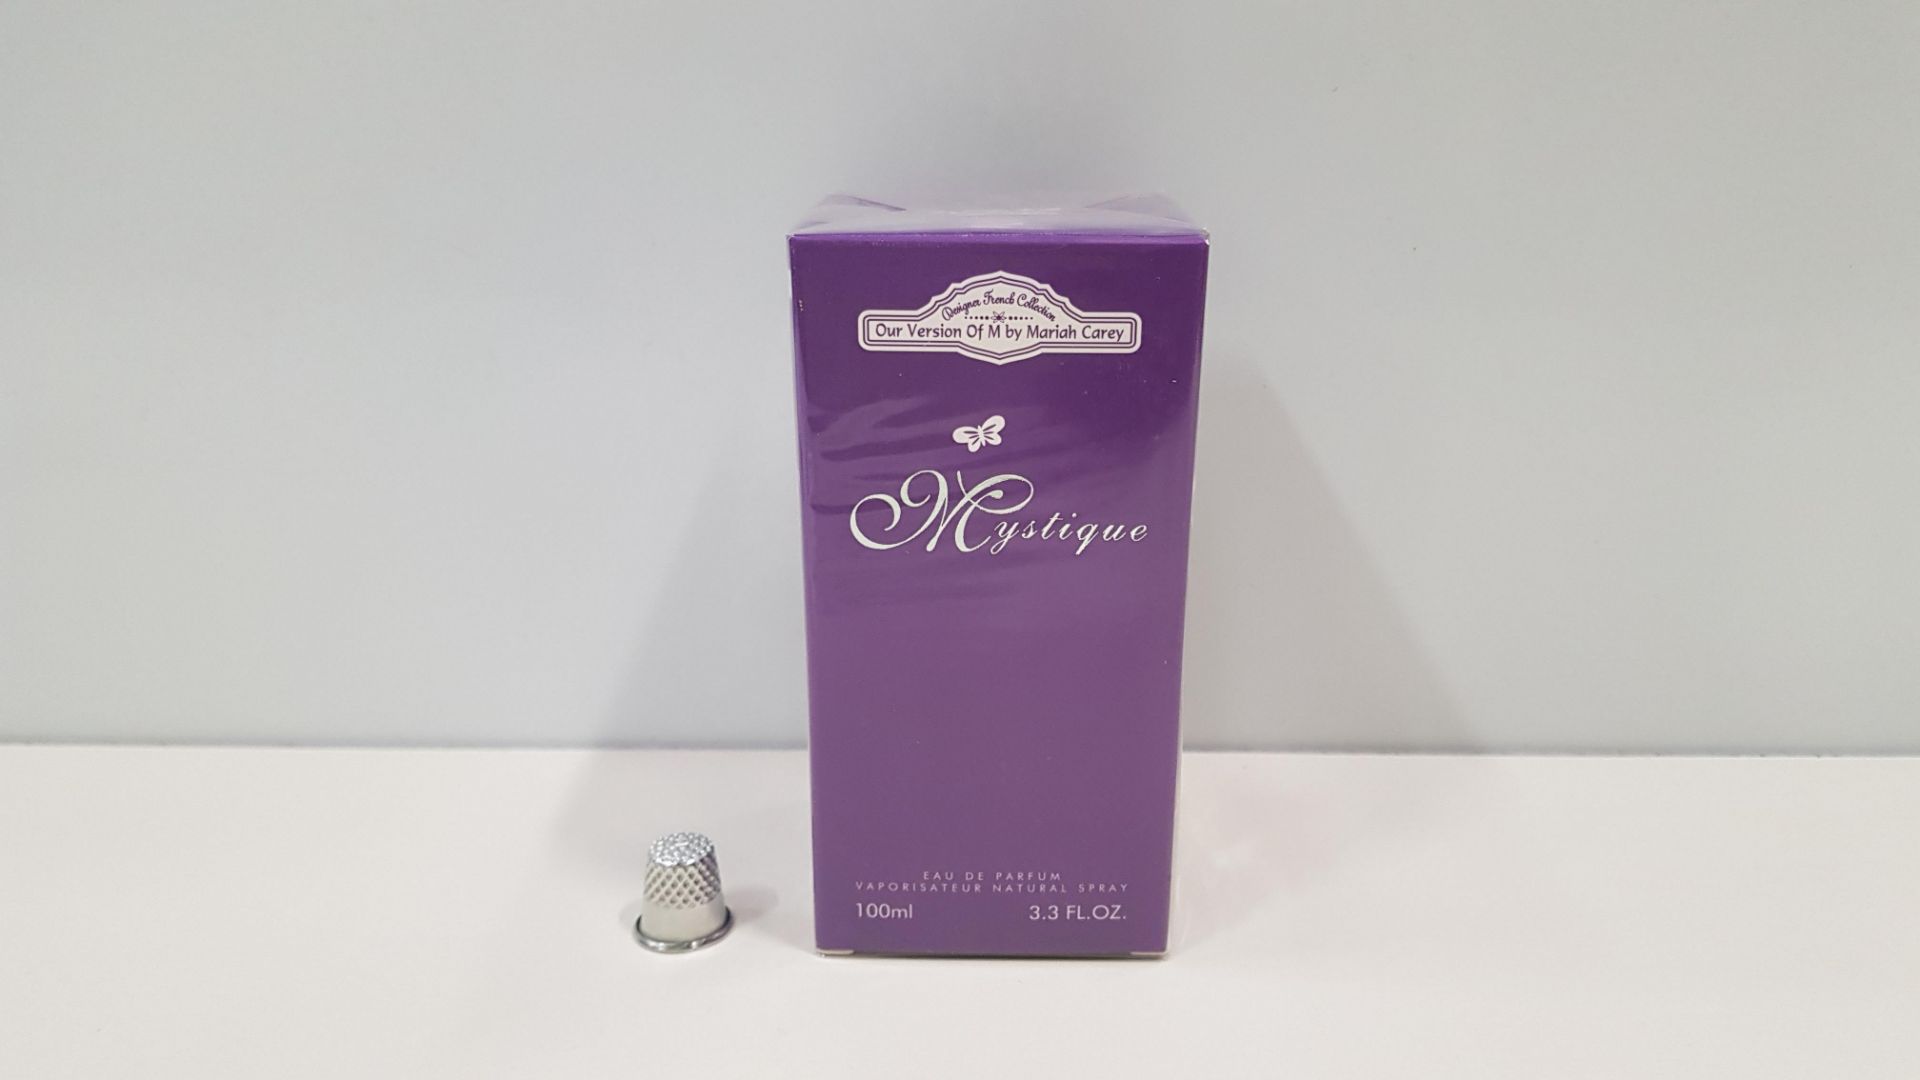 50 X BRAND NEW DESIGNER FRENCH COLLECTION MYSTIQUE EAU DE PERFUM 100ML 3.3FL.OZ. (IN ONE BOX AND 2